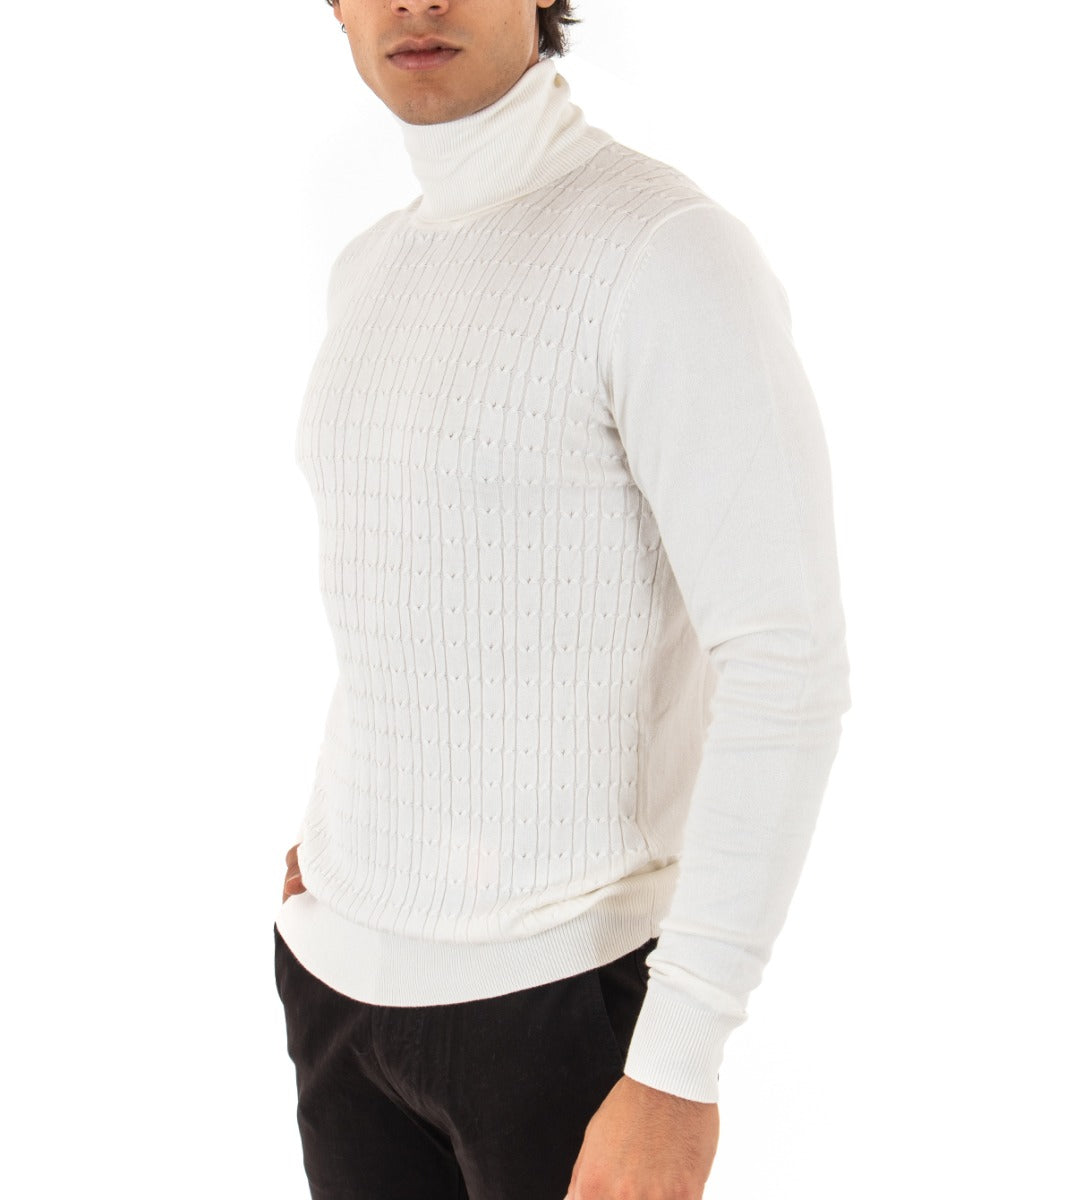 Men's Turtleneck Sweater Solid White Long Sleeves Sweater GIOSAL